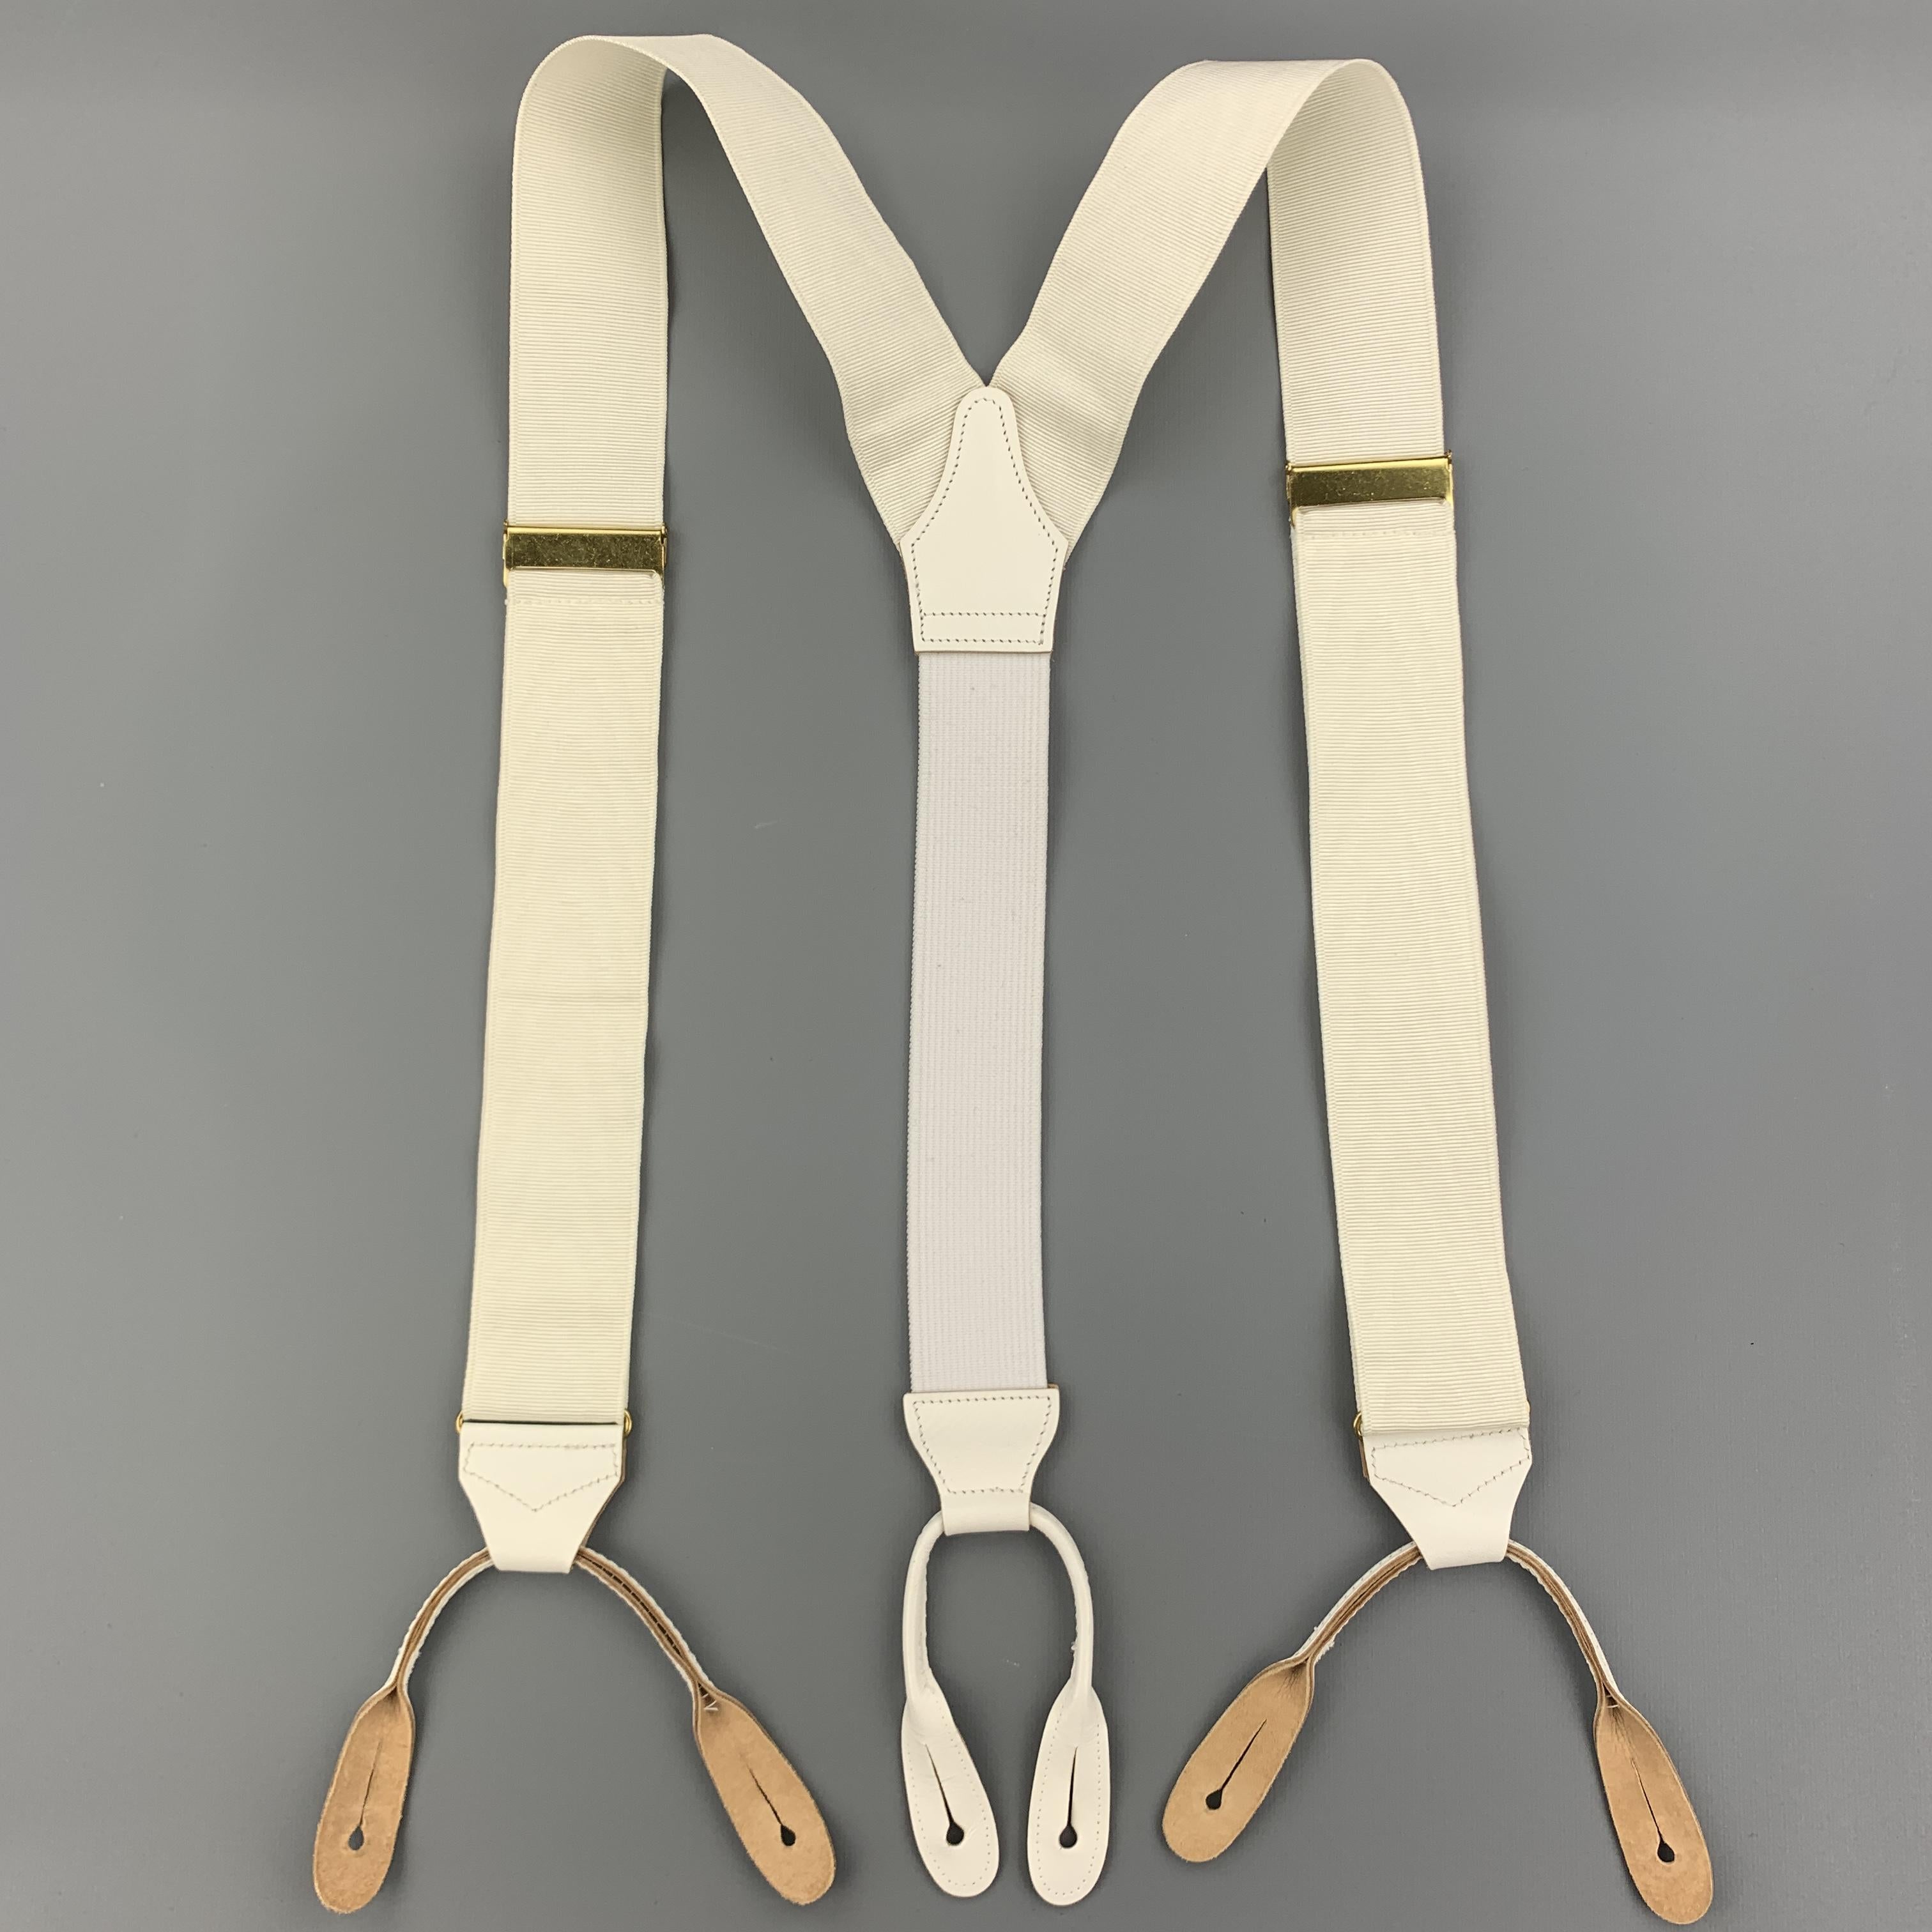 TURNBULL & ASSER suspenders comes in a off white textured grosgrain featuring a adjustable fit, leather trim, and includes trouser buttons. Made in England.

Excellent Pre-Owned Condition:

Measurements:

Width: 1.5 in.